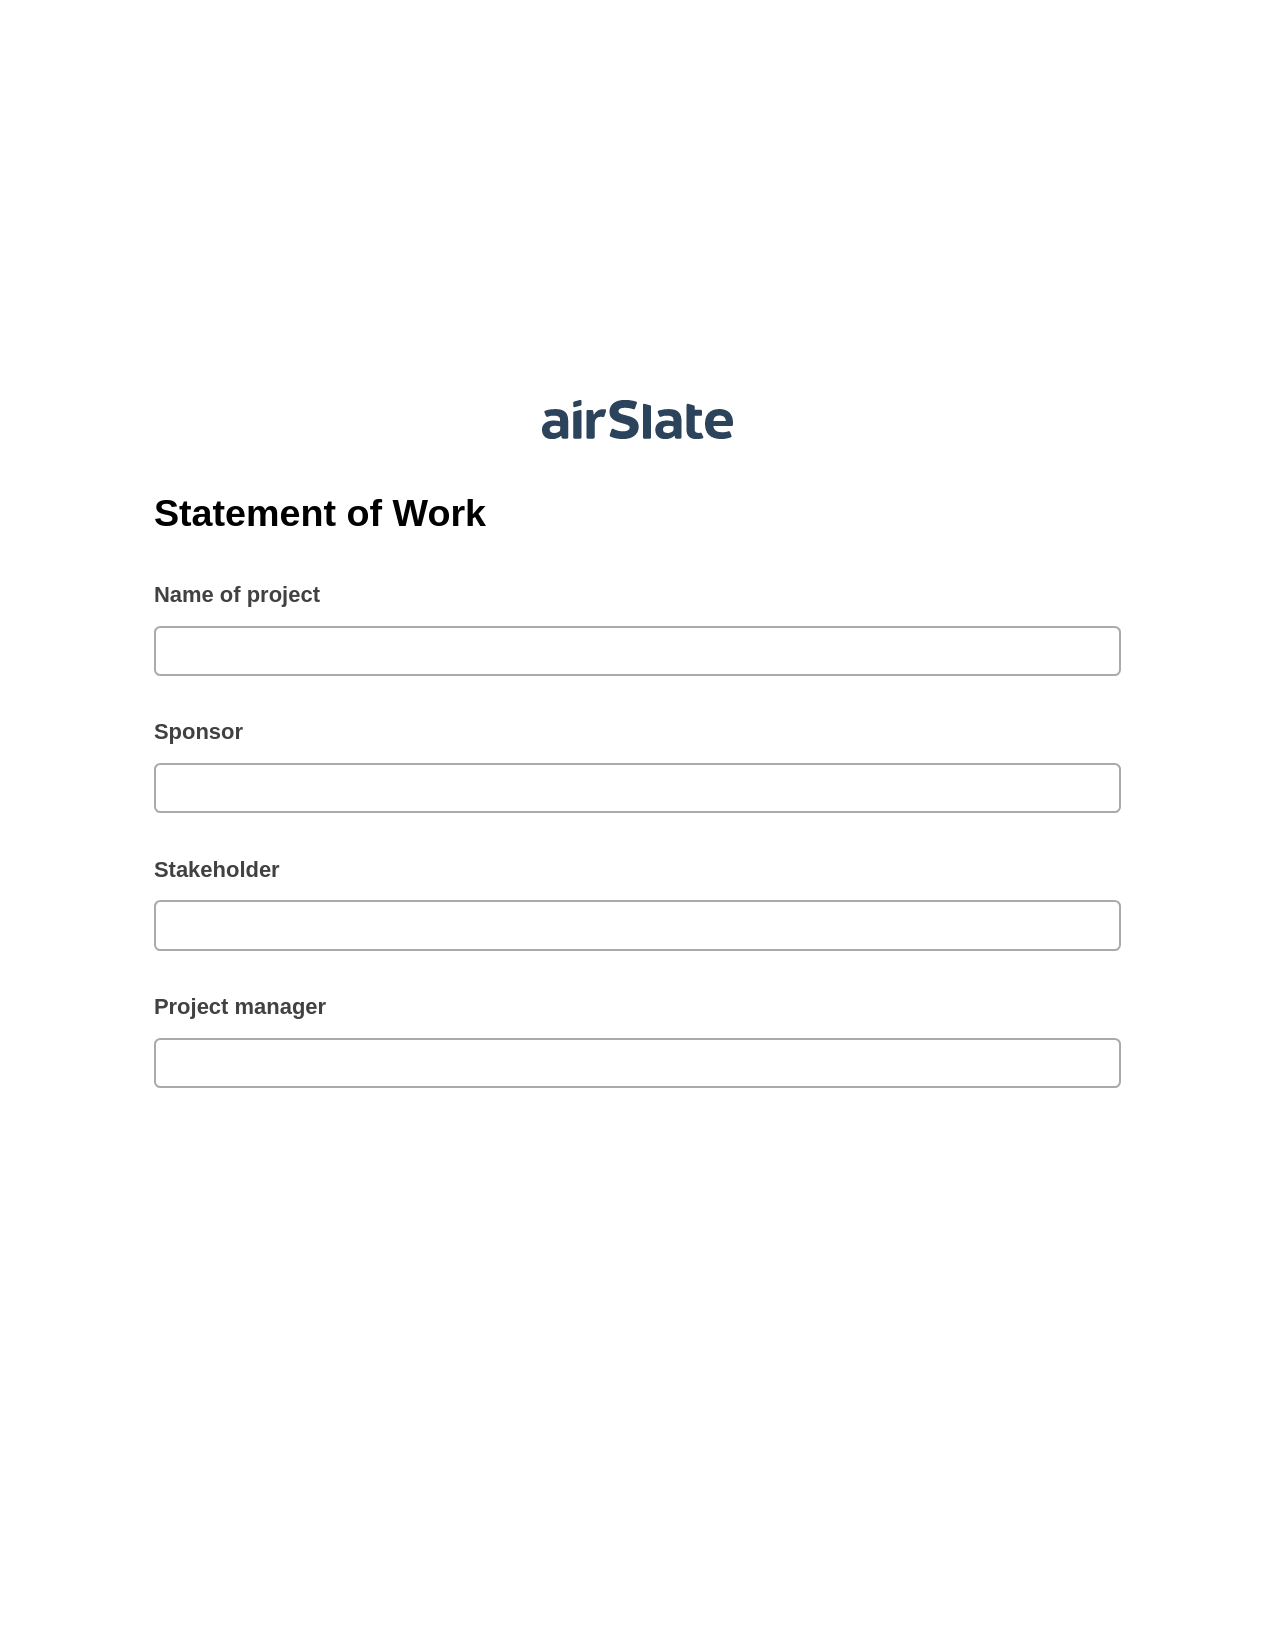 Statement of Work Pre-fill from CSV File Dropdown Options Bot, Add Tags to Slate Bot, Email Notification Postfinish Bot